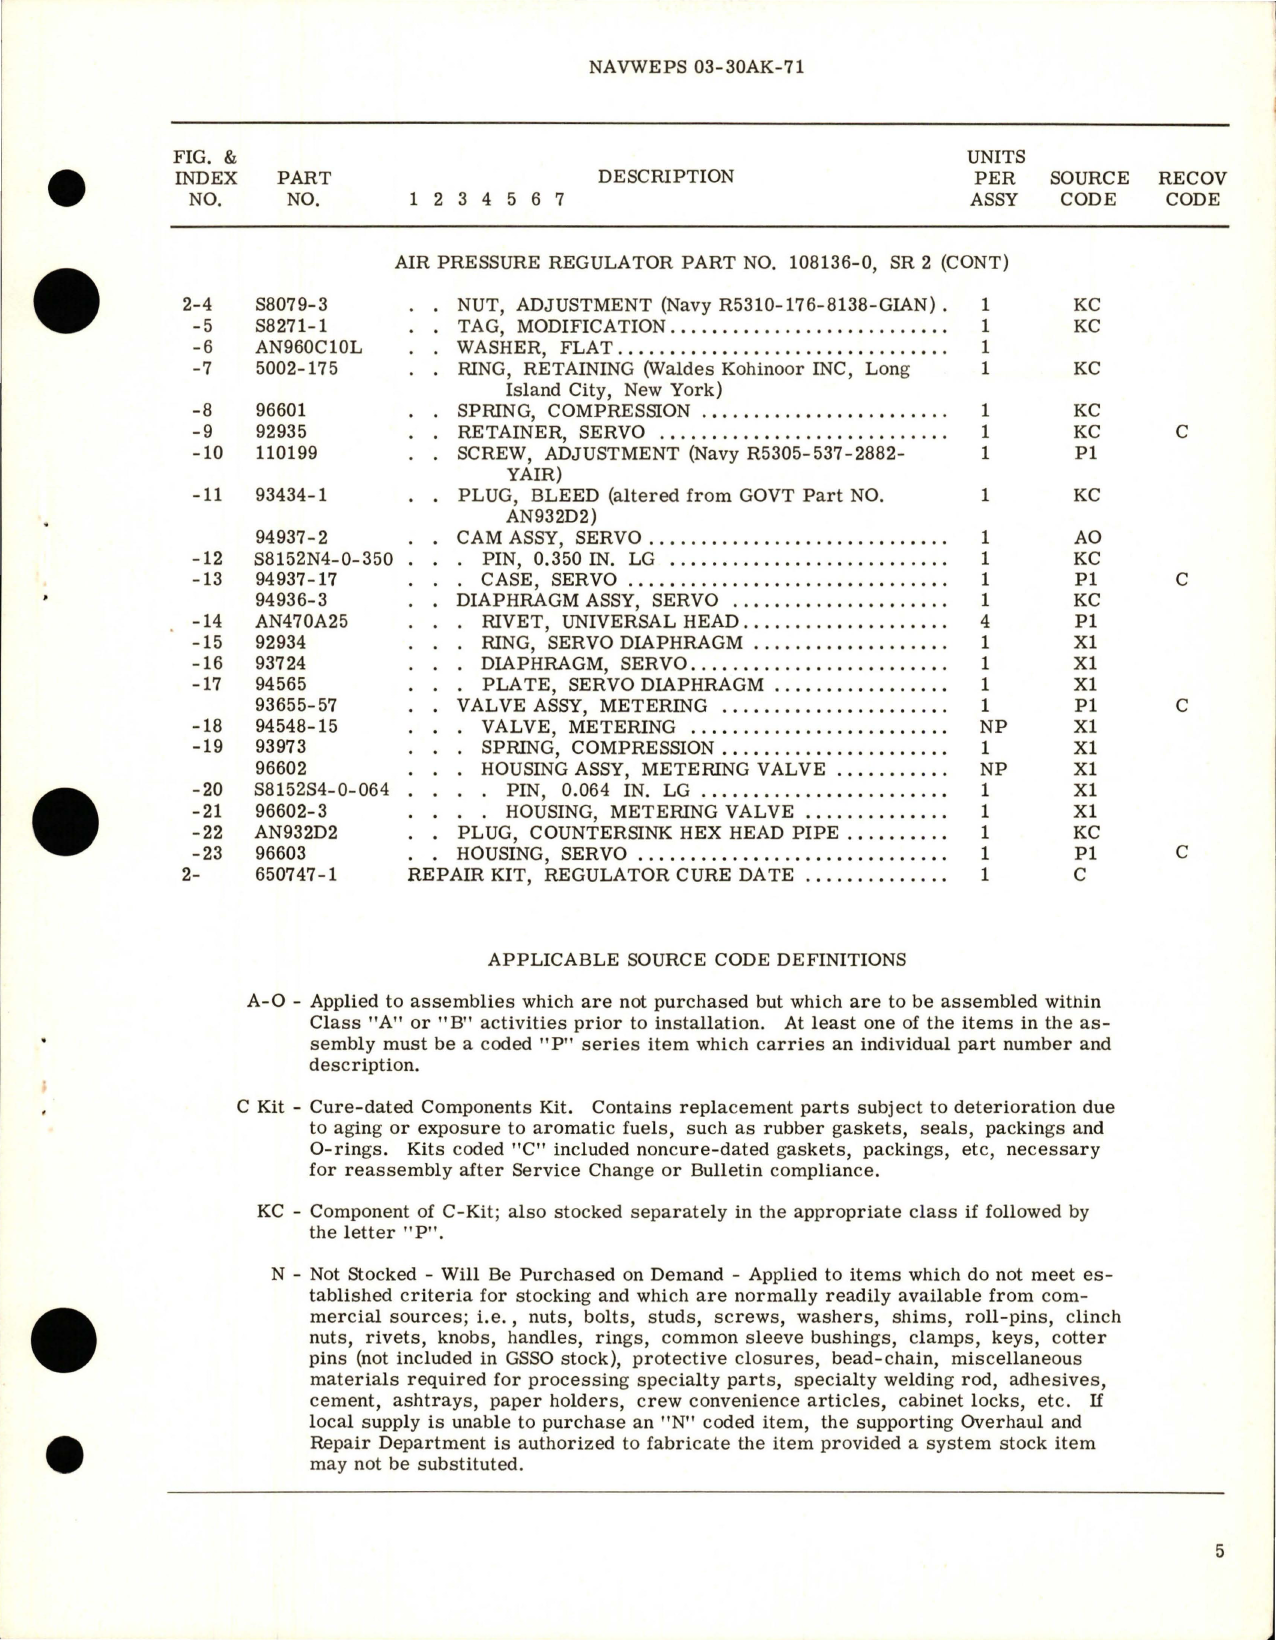 Sample page 5 from AirCorps Library document: Overhaul Instructions with Parts Breakdown for Air Pressure Regulator - Parts 108136-0 SR2